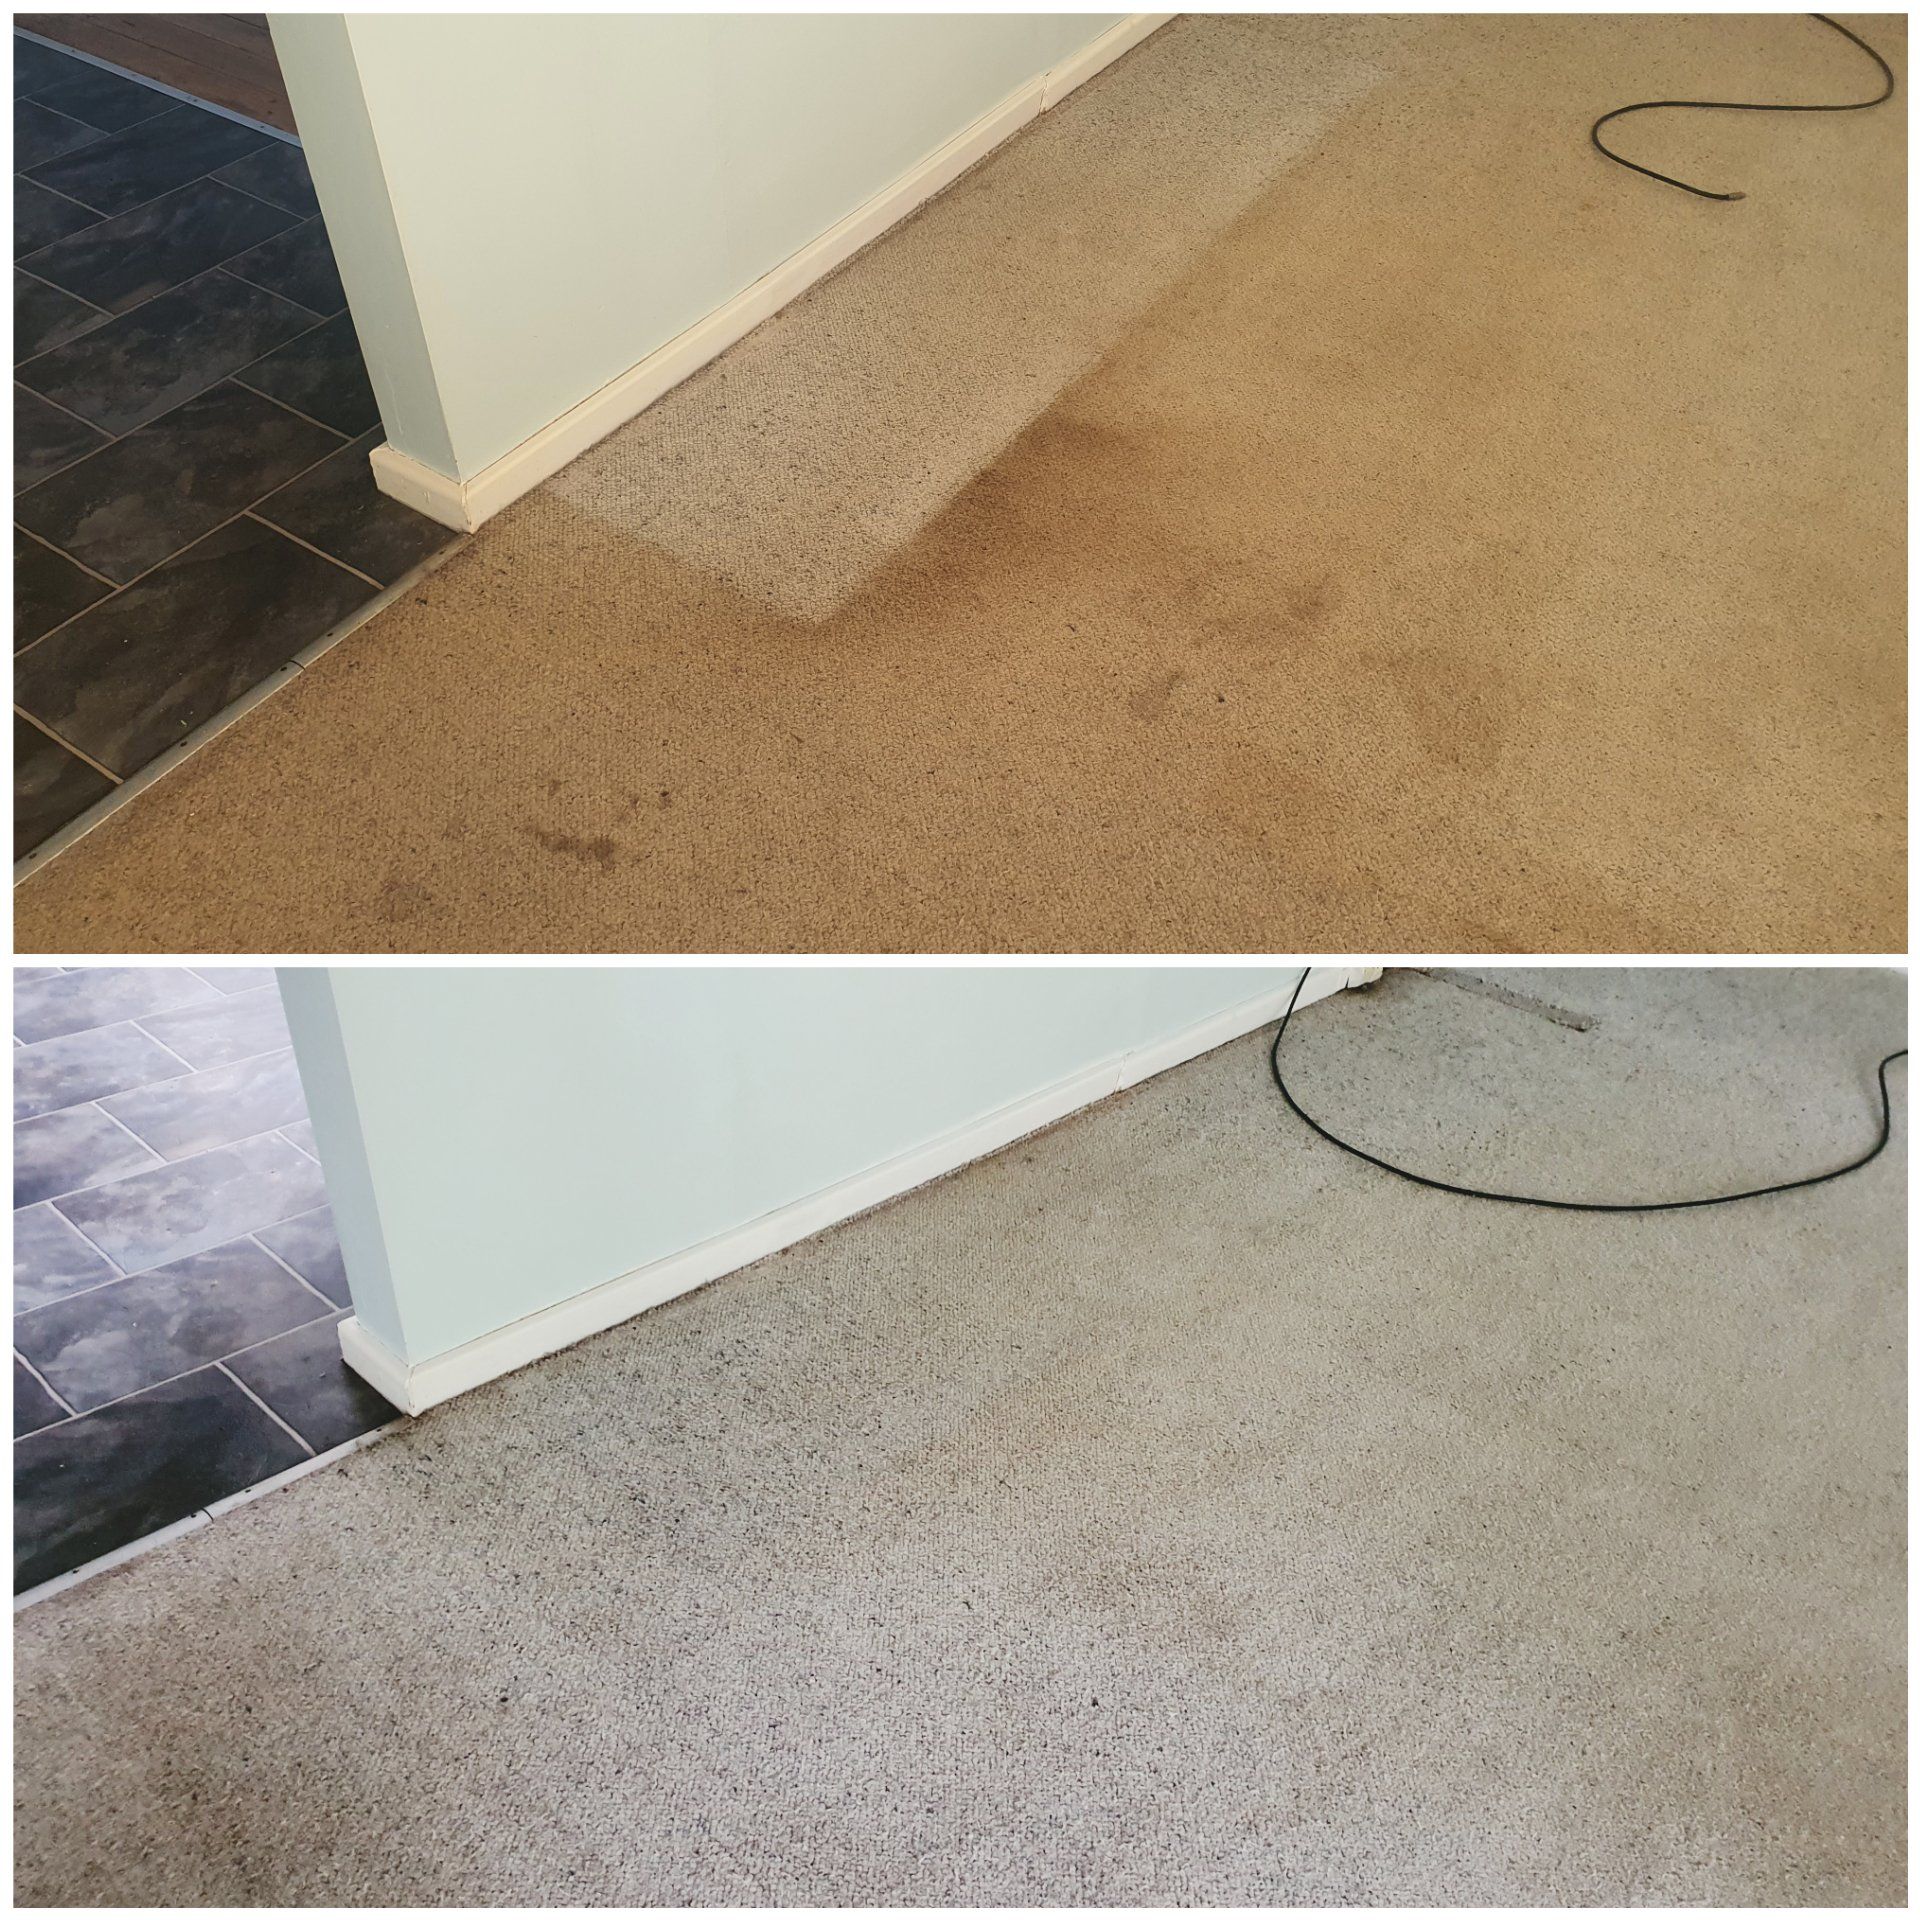 Carpet Before And After Cleaning — Carpet Cleaning in Maitland, NSW